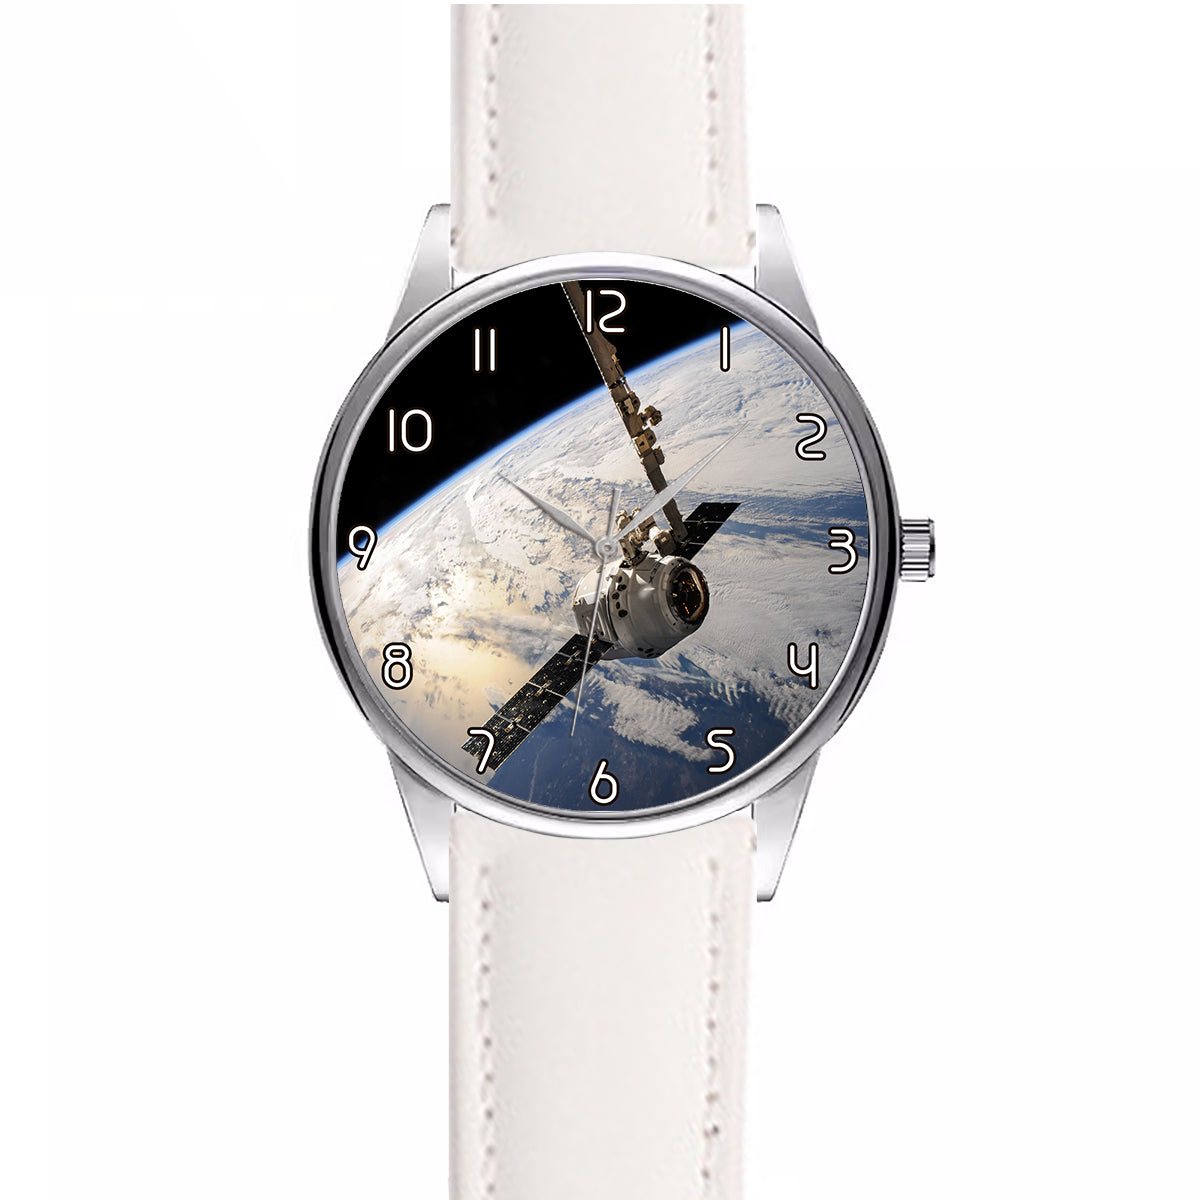 Airplane Flying over Big Buildings Designed Fashion Leather Strap Watches